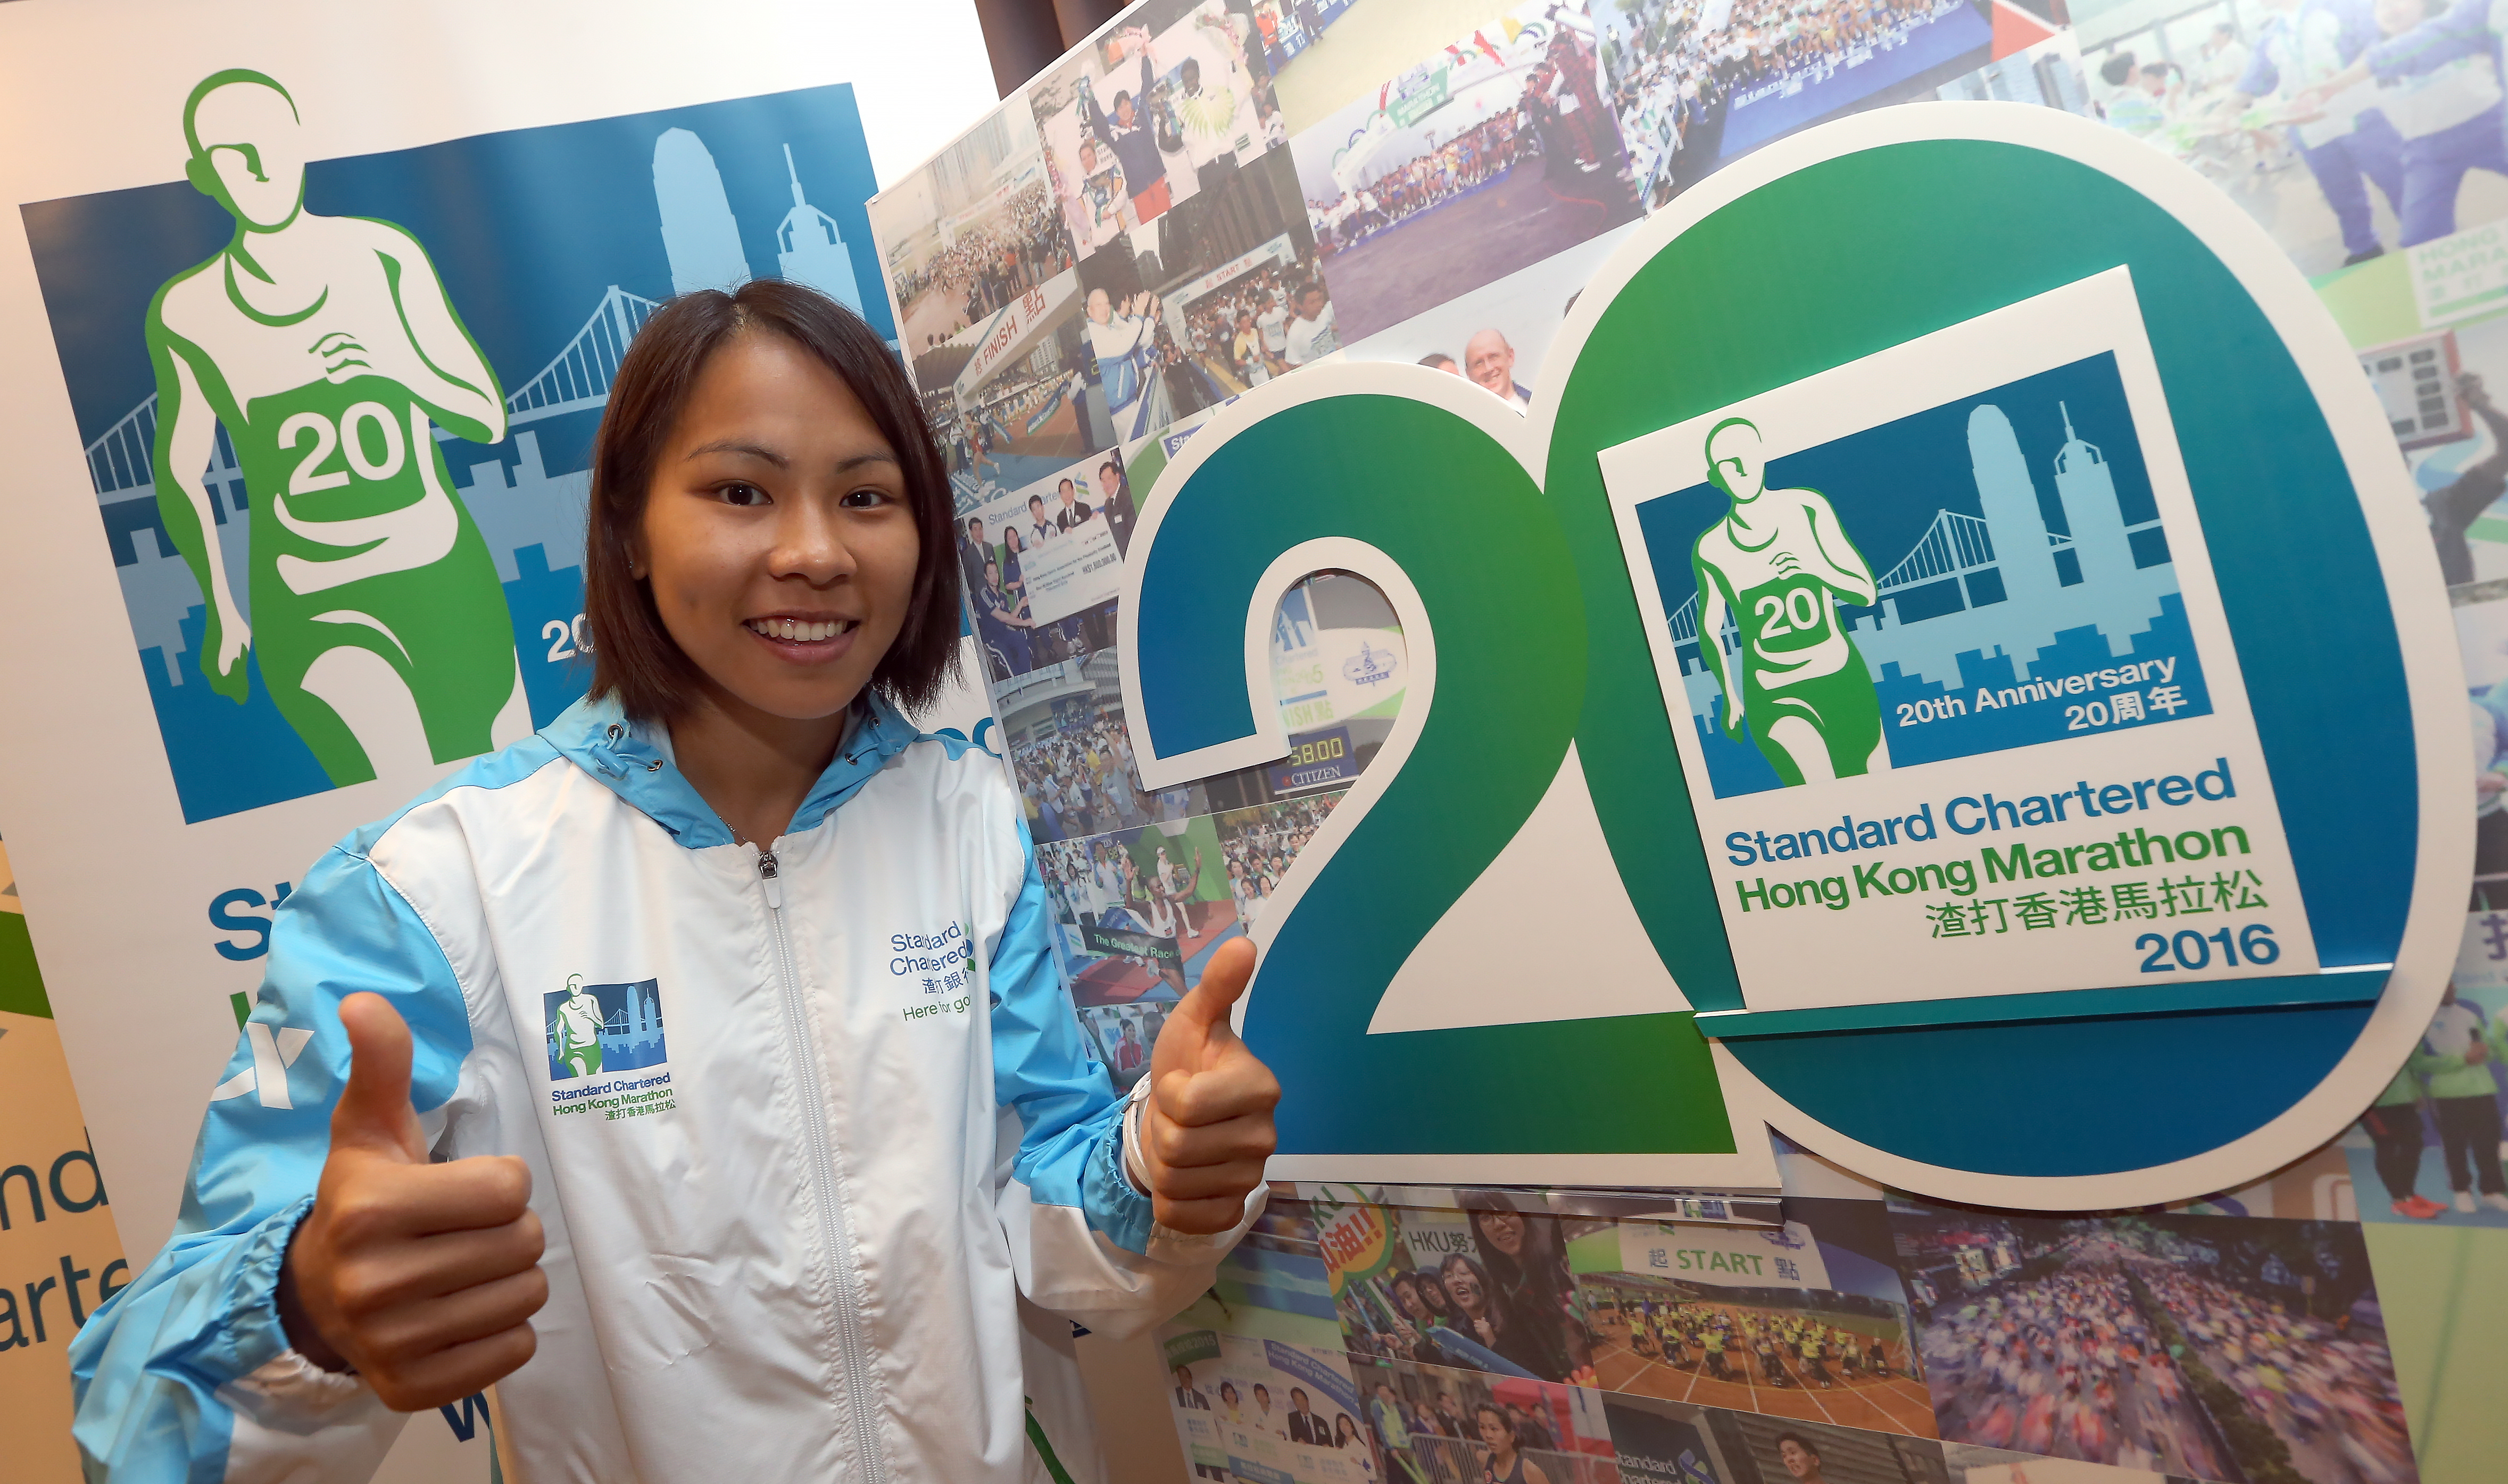 Hong Kong team runners Christy Yiu Kit-ching attends the 2016 Standard Chartered Hong Kong Marathon press conference at Standard Chartered Bank Building in Central. 22SEP15